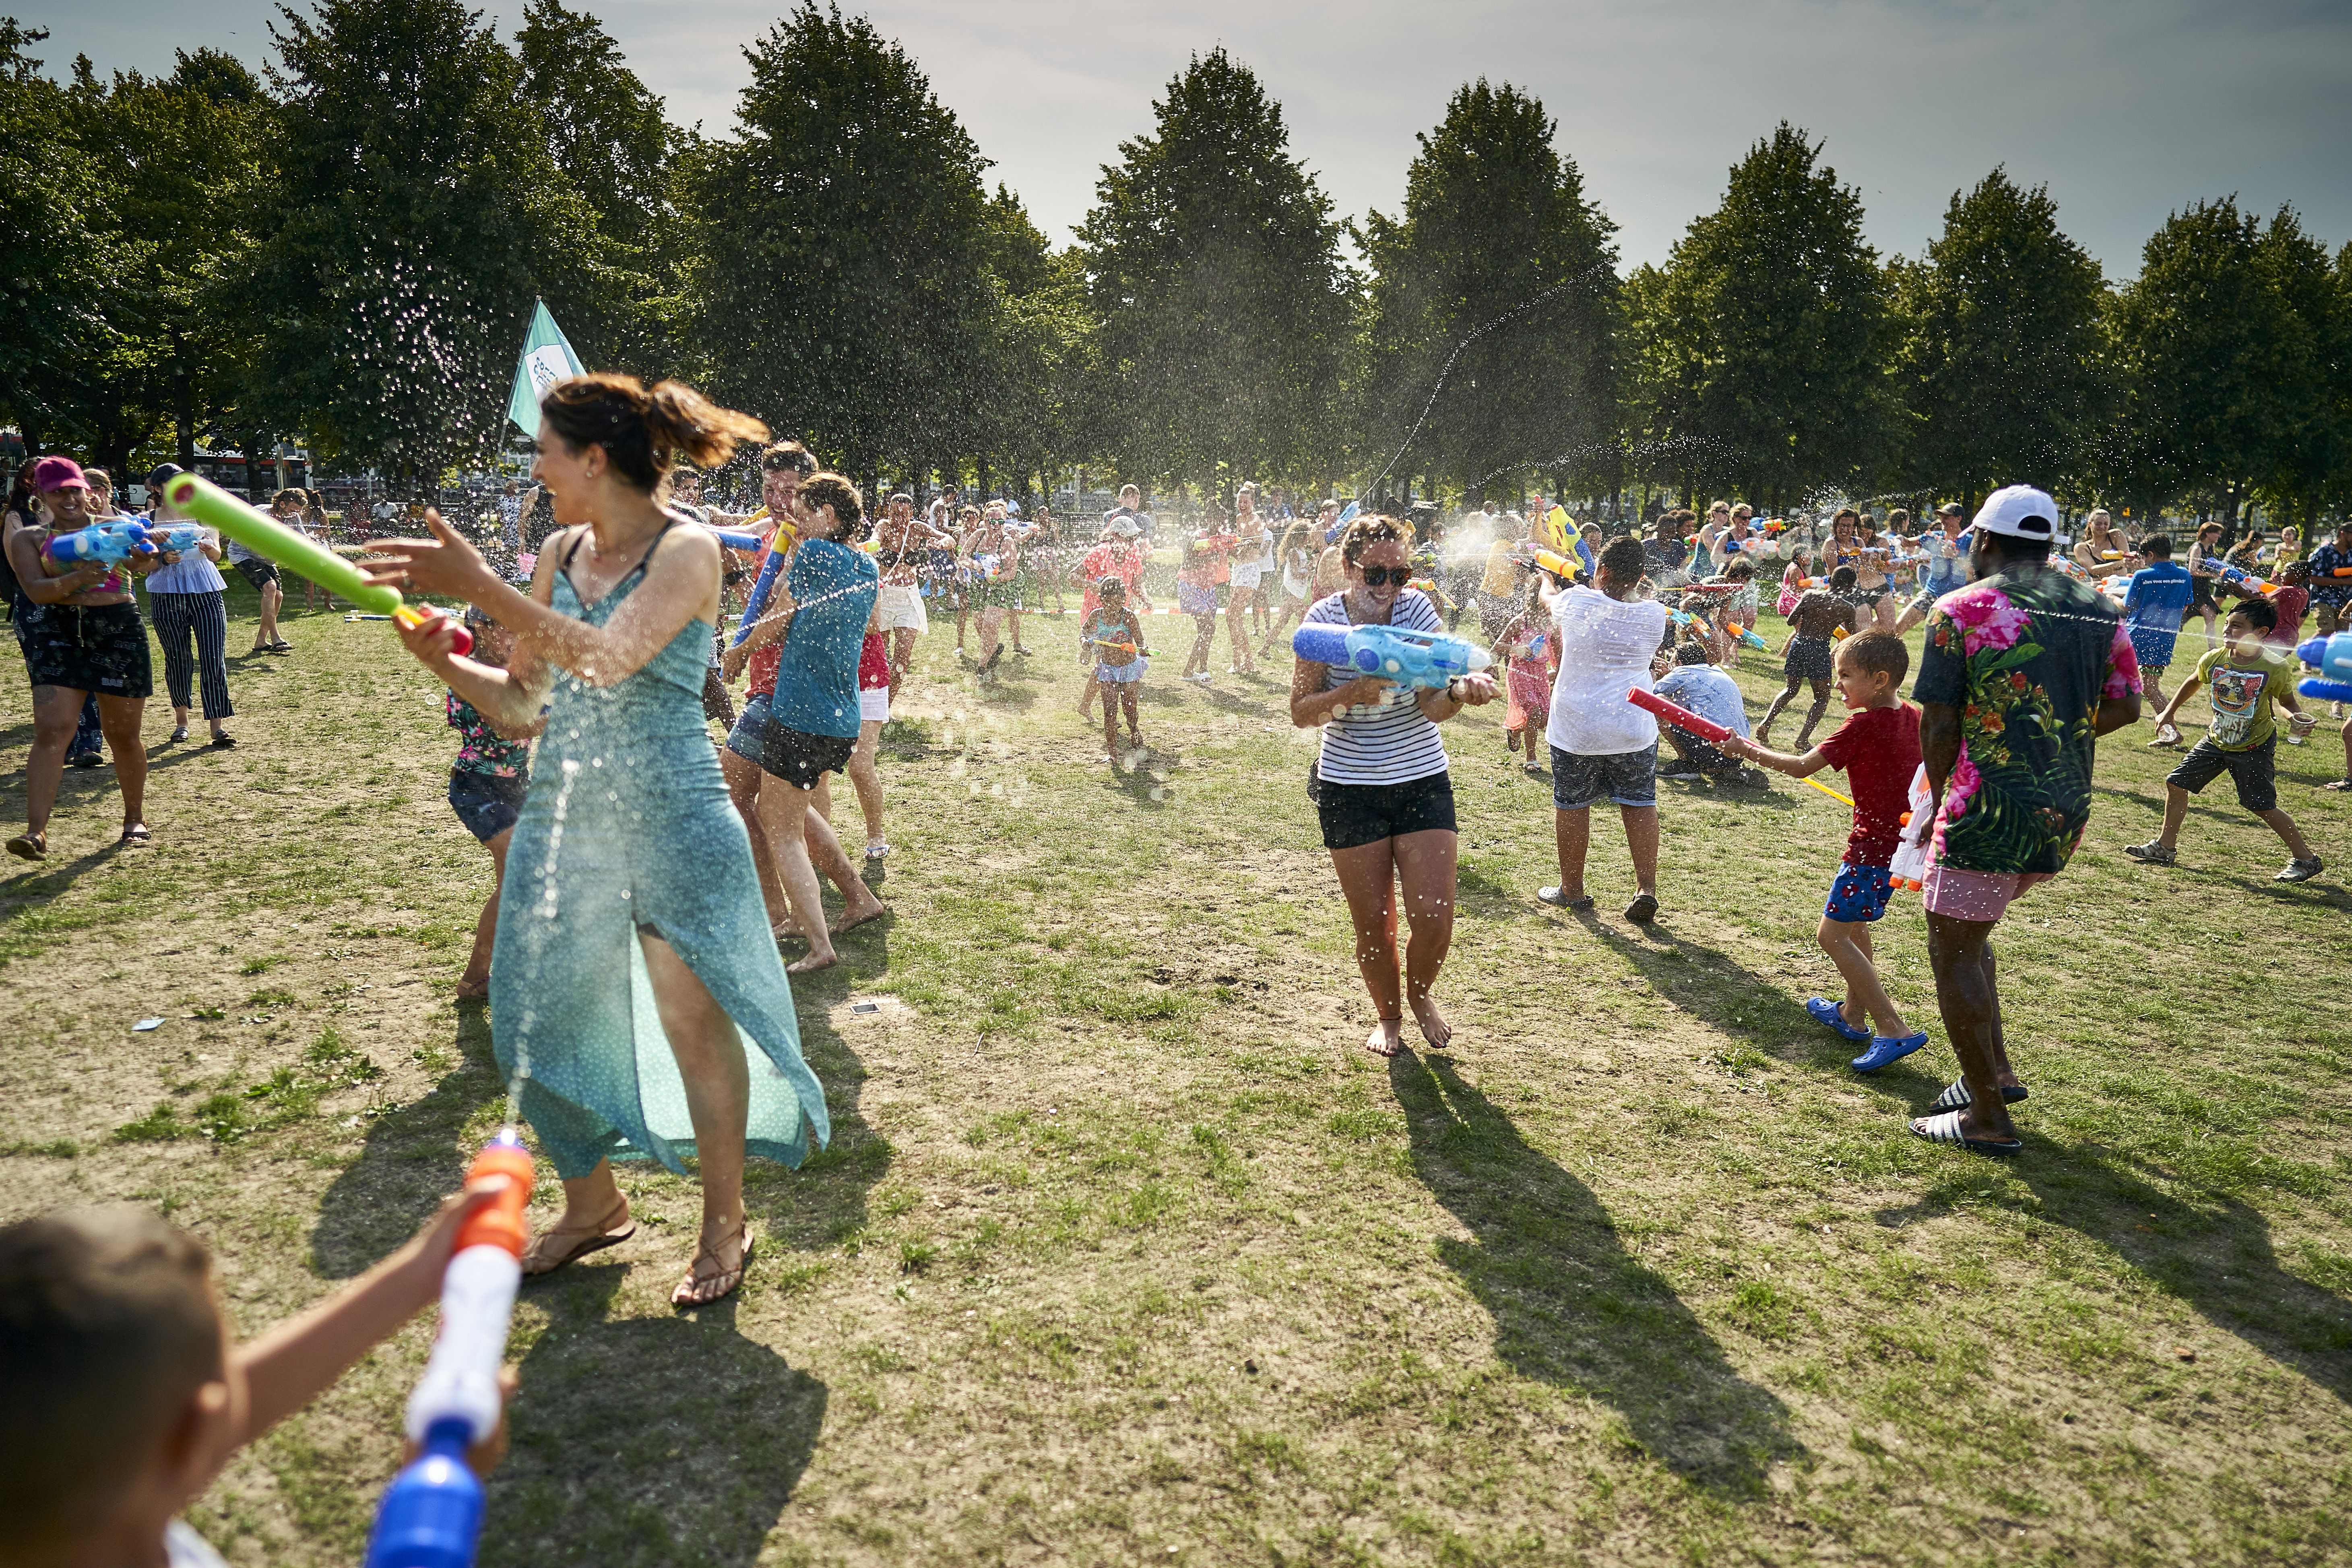 People cool off with a water fight on the Malieveld, in The Hague city center, on Wednesday. (Phil Nijhuis/AFP/Getty Images)